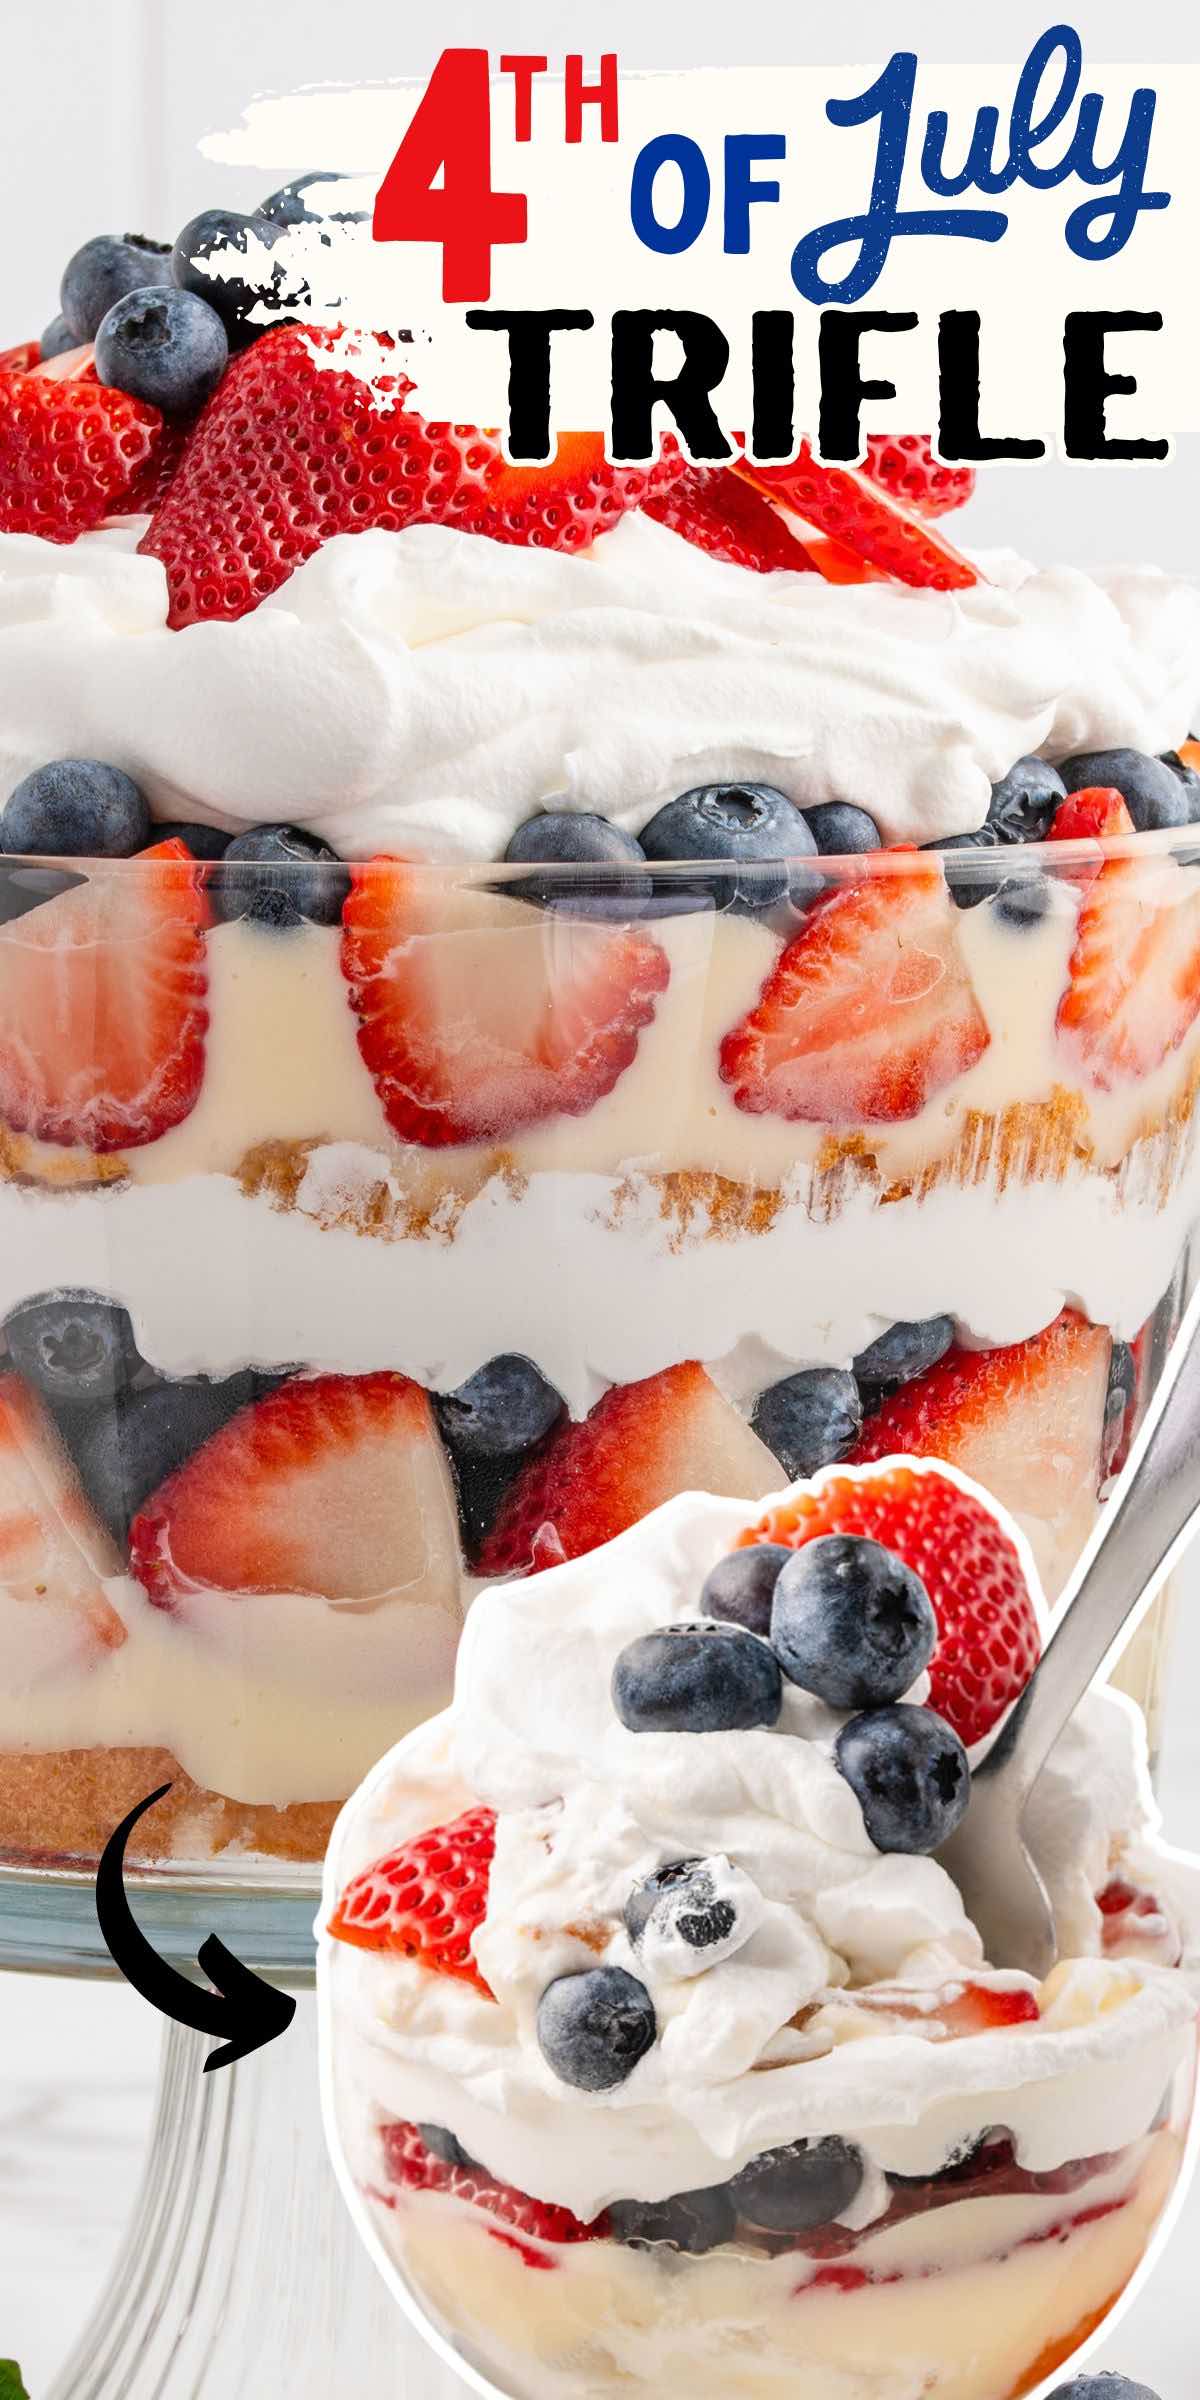 4th of july trifle pins.